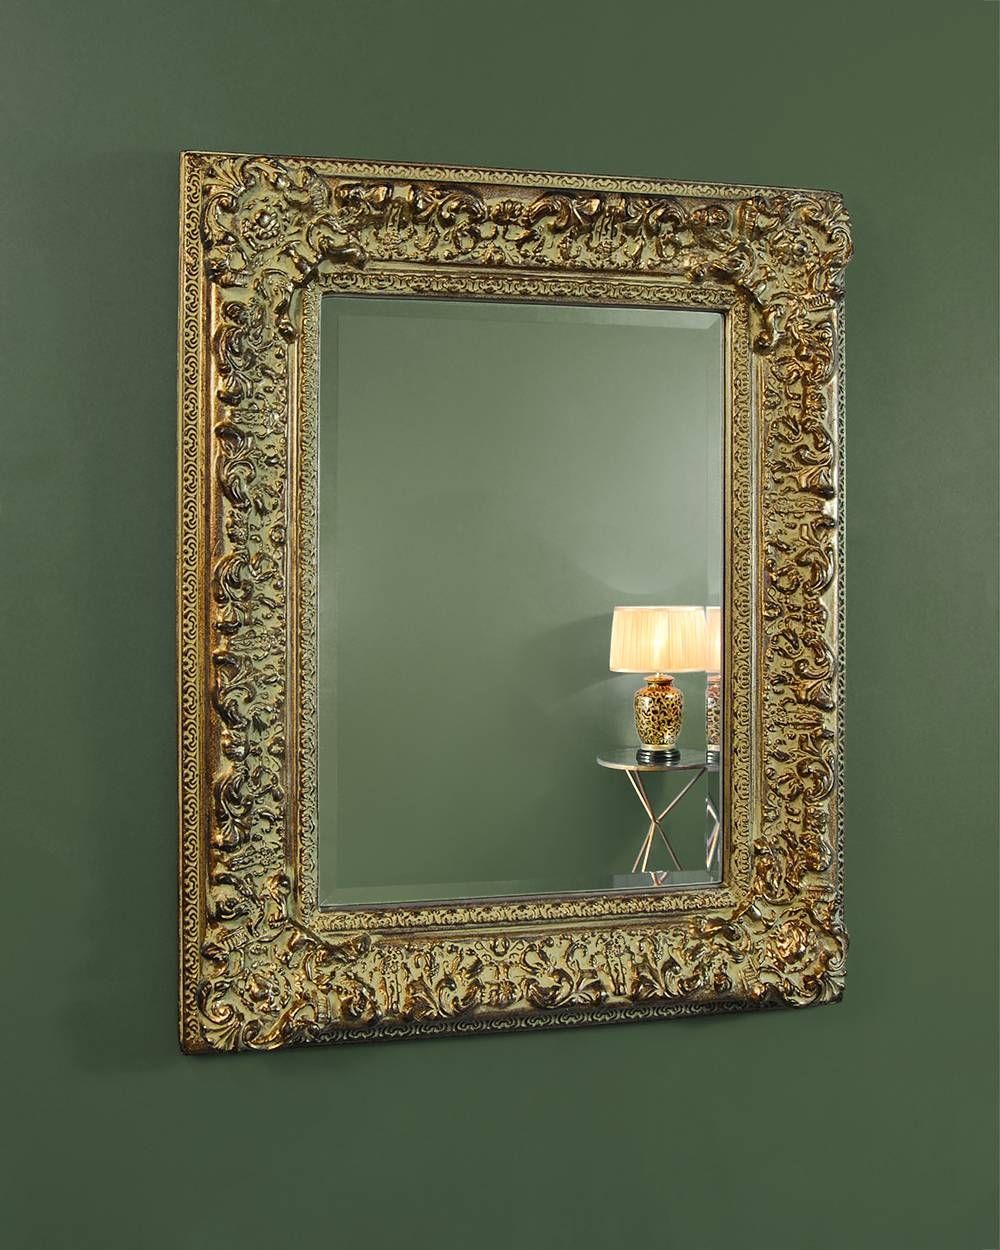 Decorative Mirrors | The Chandelier & Mirror Company Regarding Embellished Mirrors (View 7 of 15)